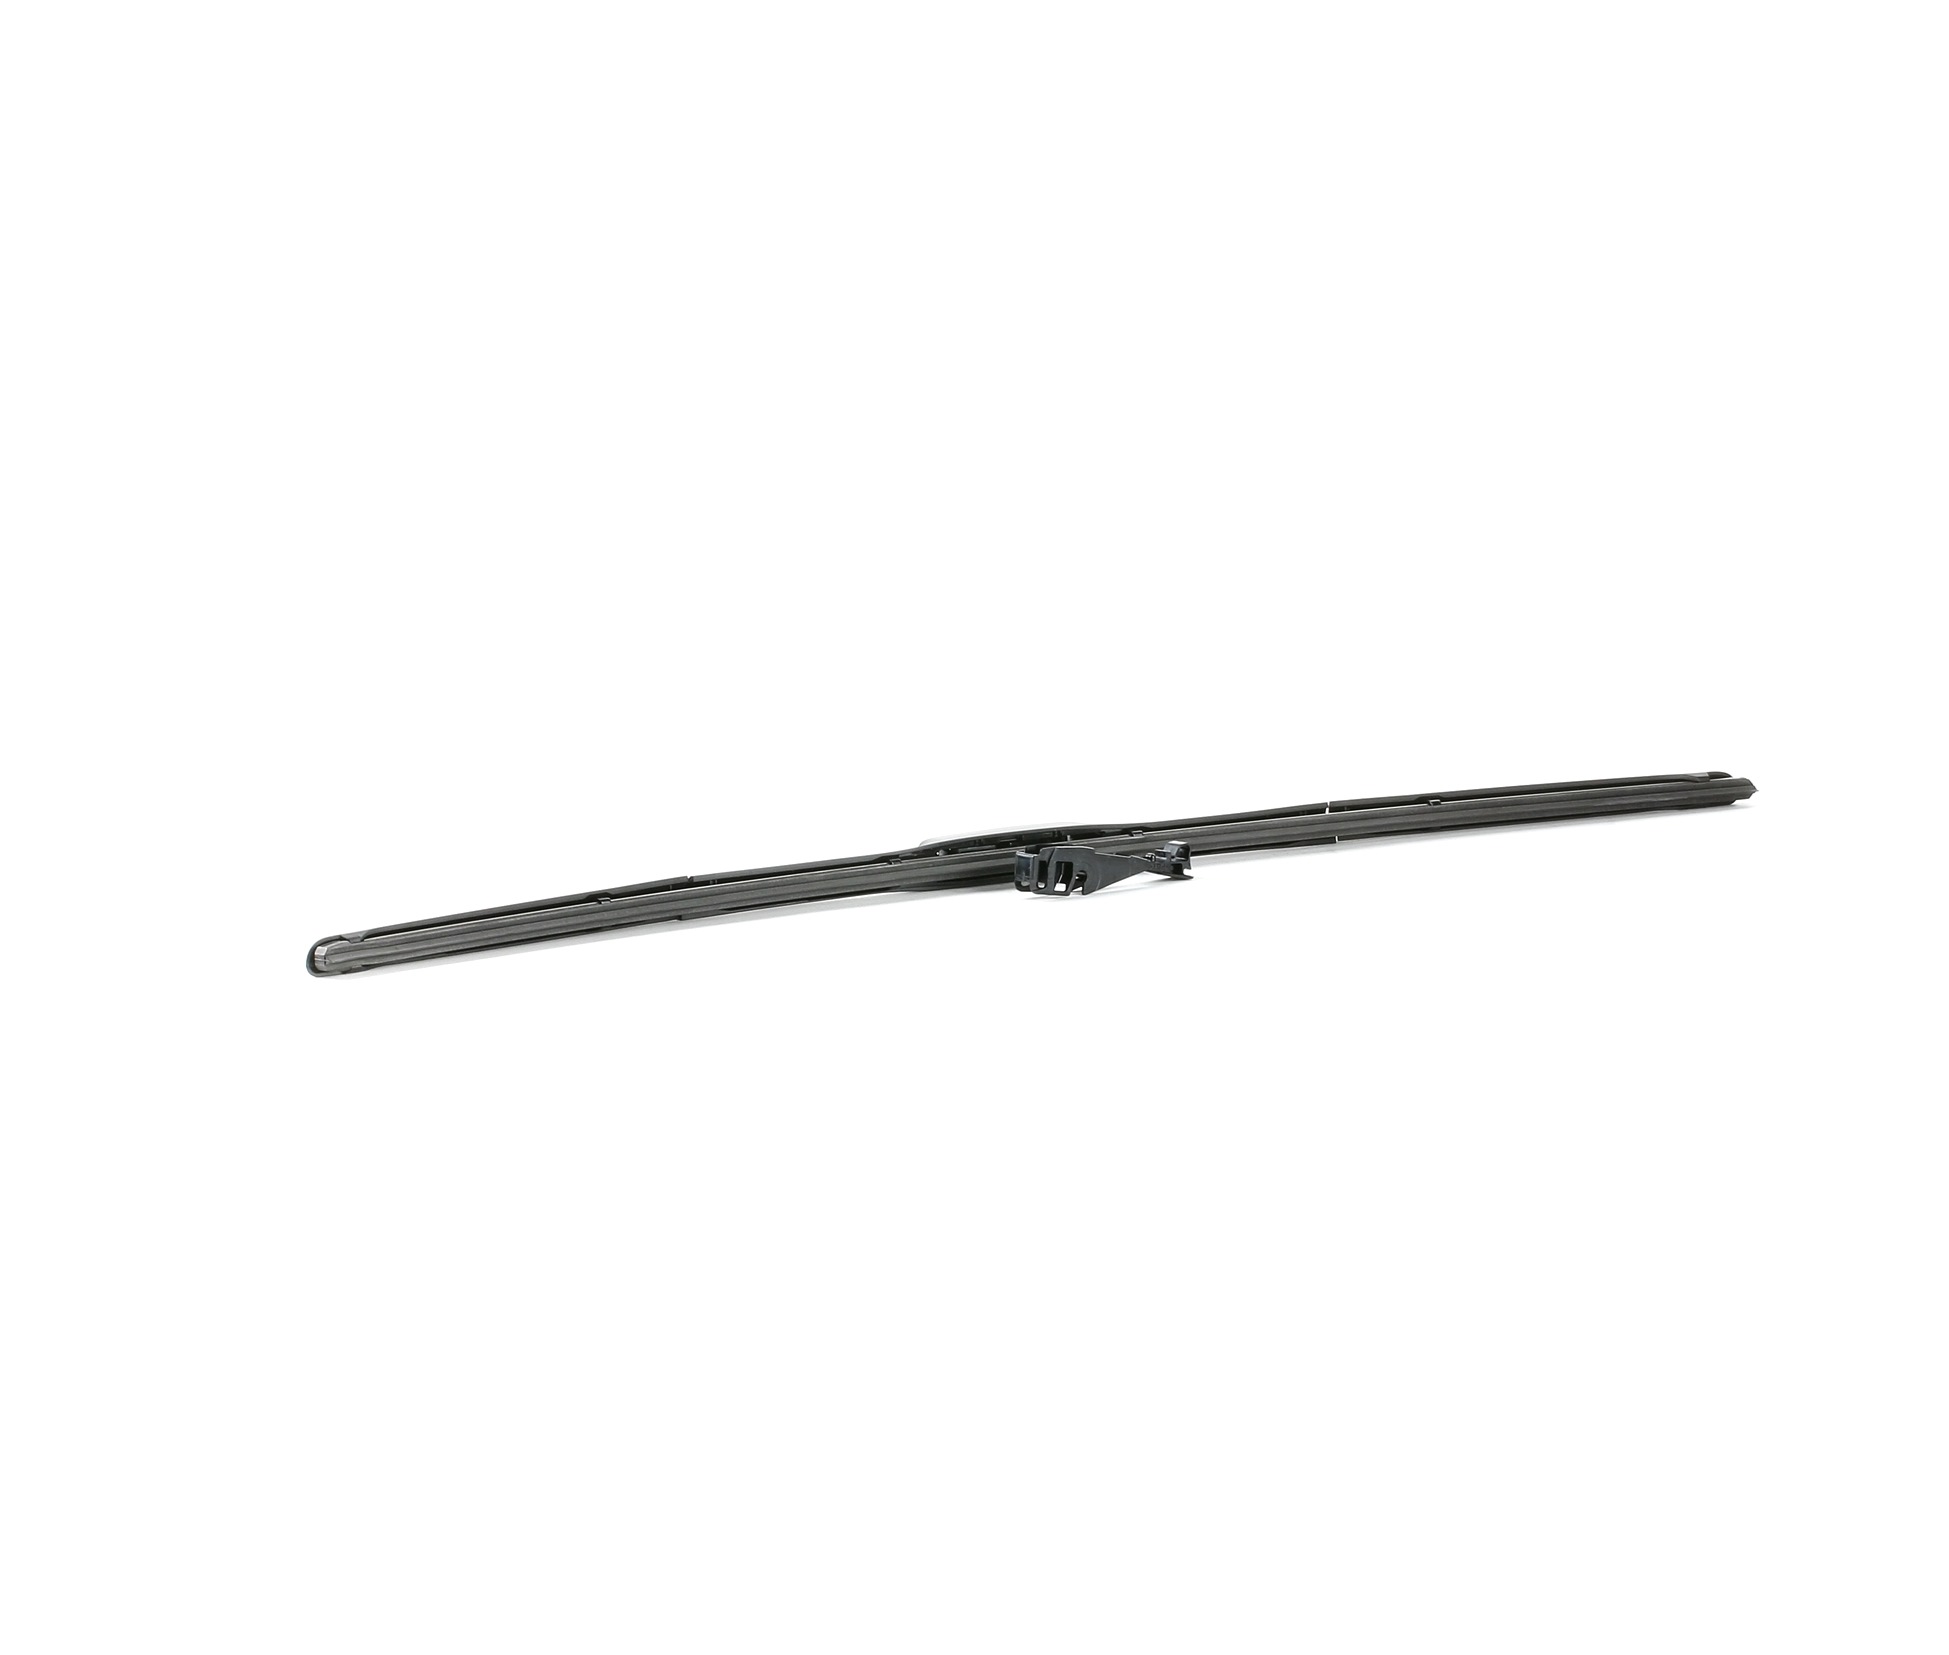 Buy Wiper Blade DENSO DUR-065R - LAND ROVER Windscreen cleaning system parts online